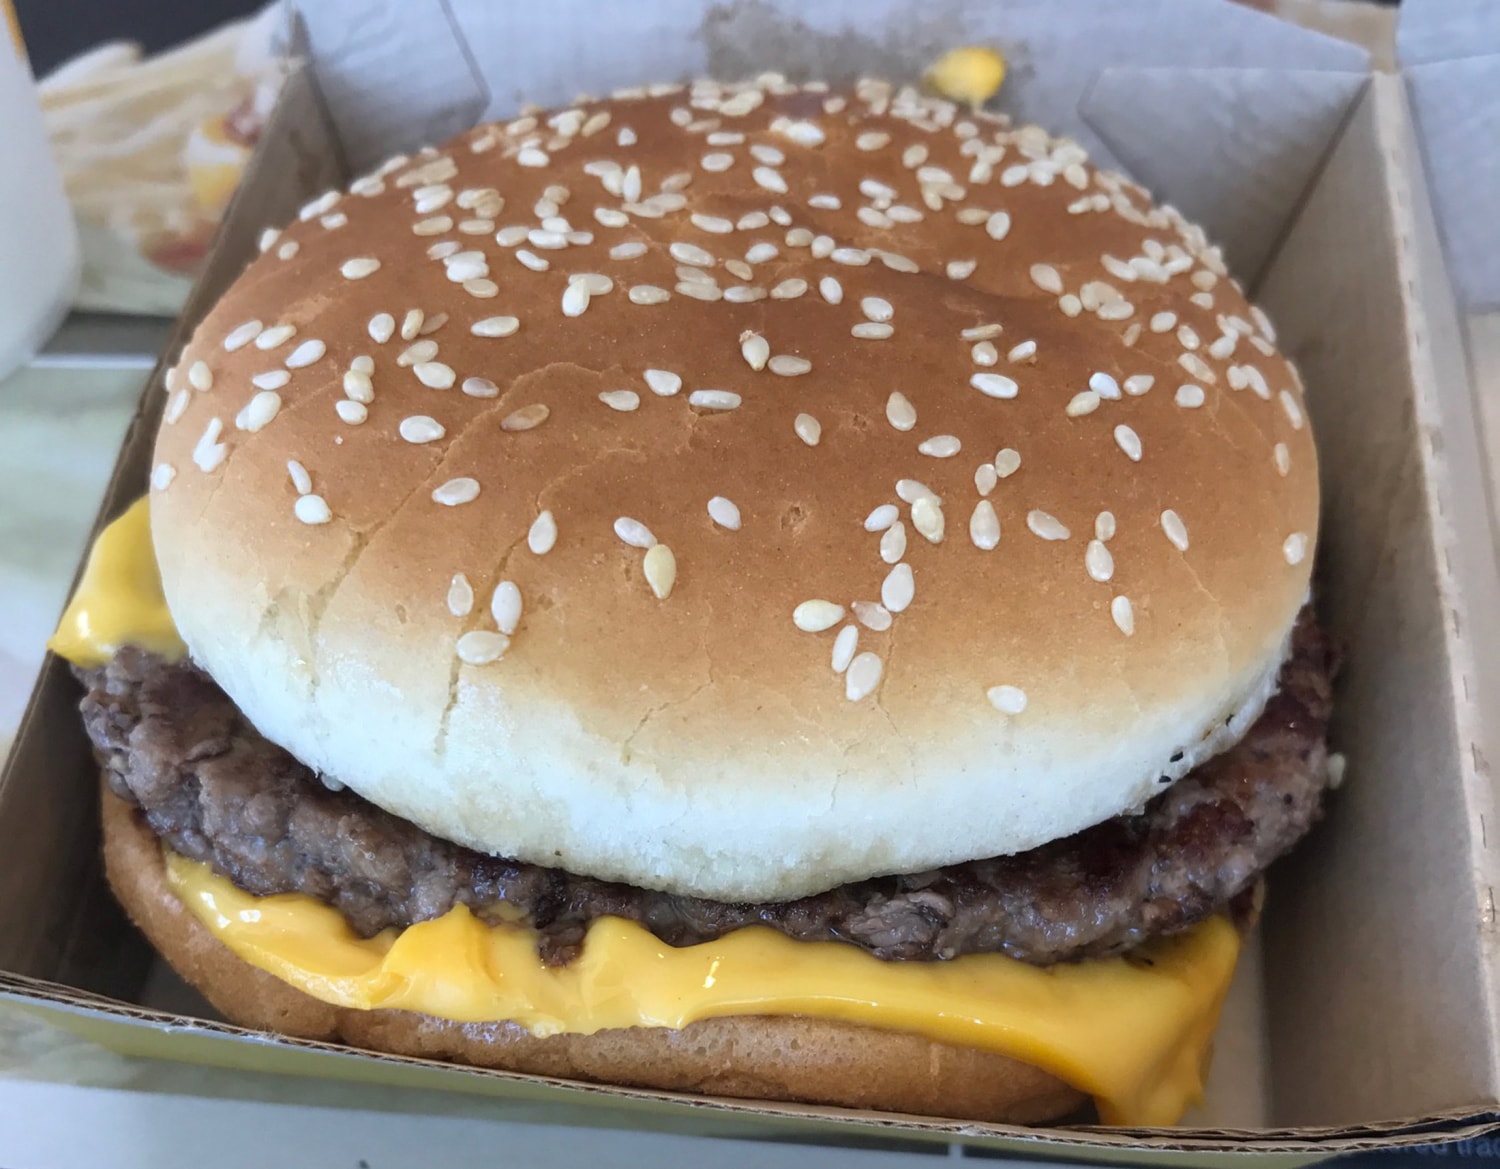 Your 'Fresh To Order' Burger From McDonald's Probably Isn't That Fresh : r/ McDonalds